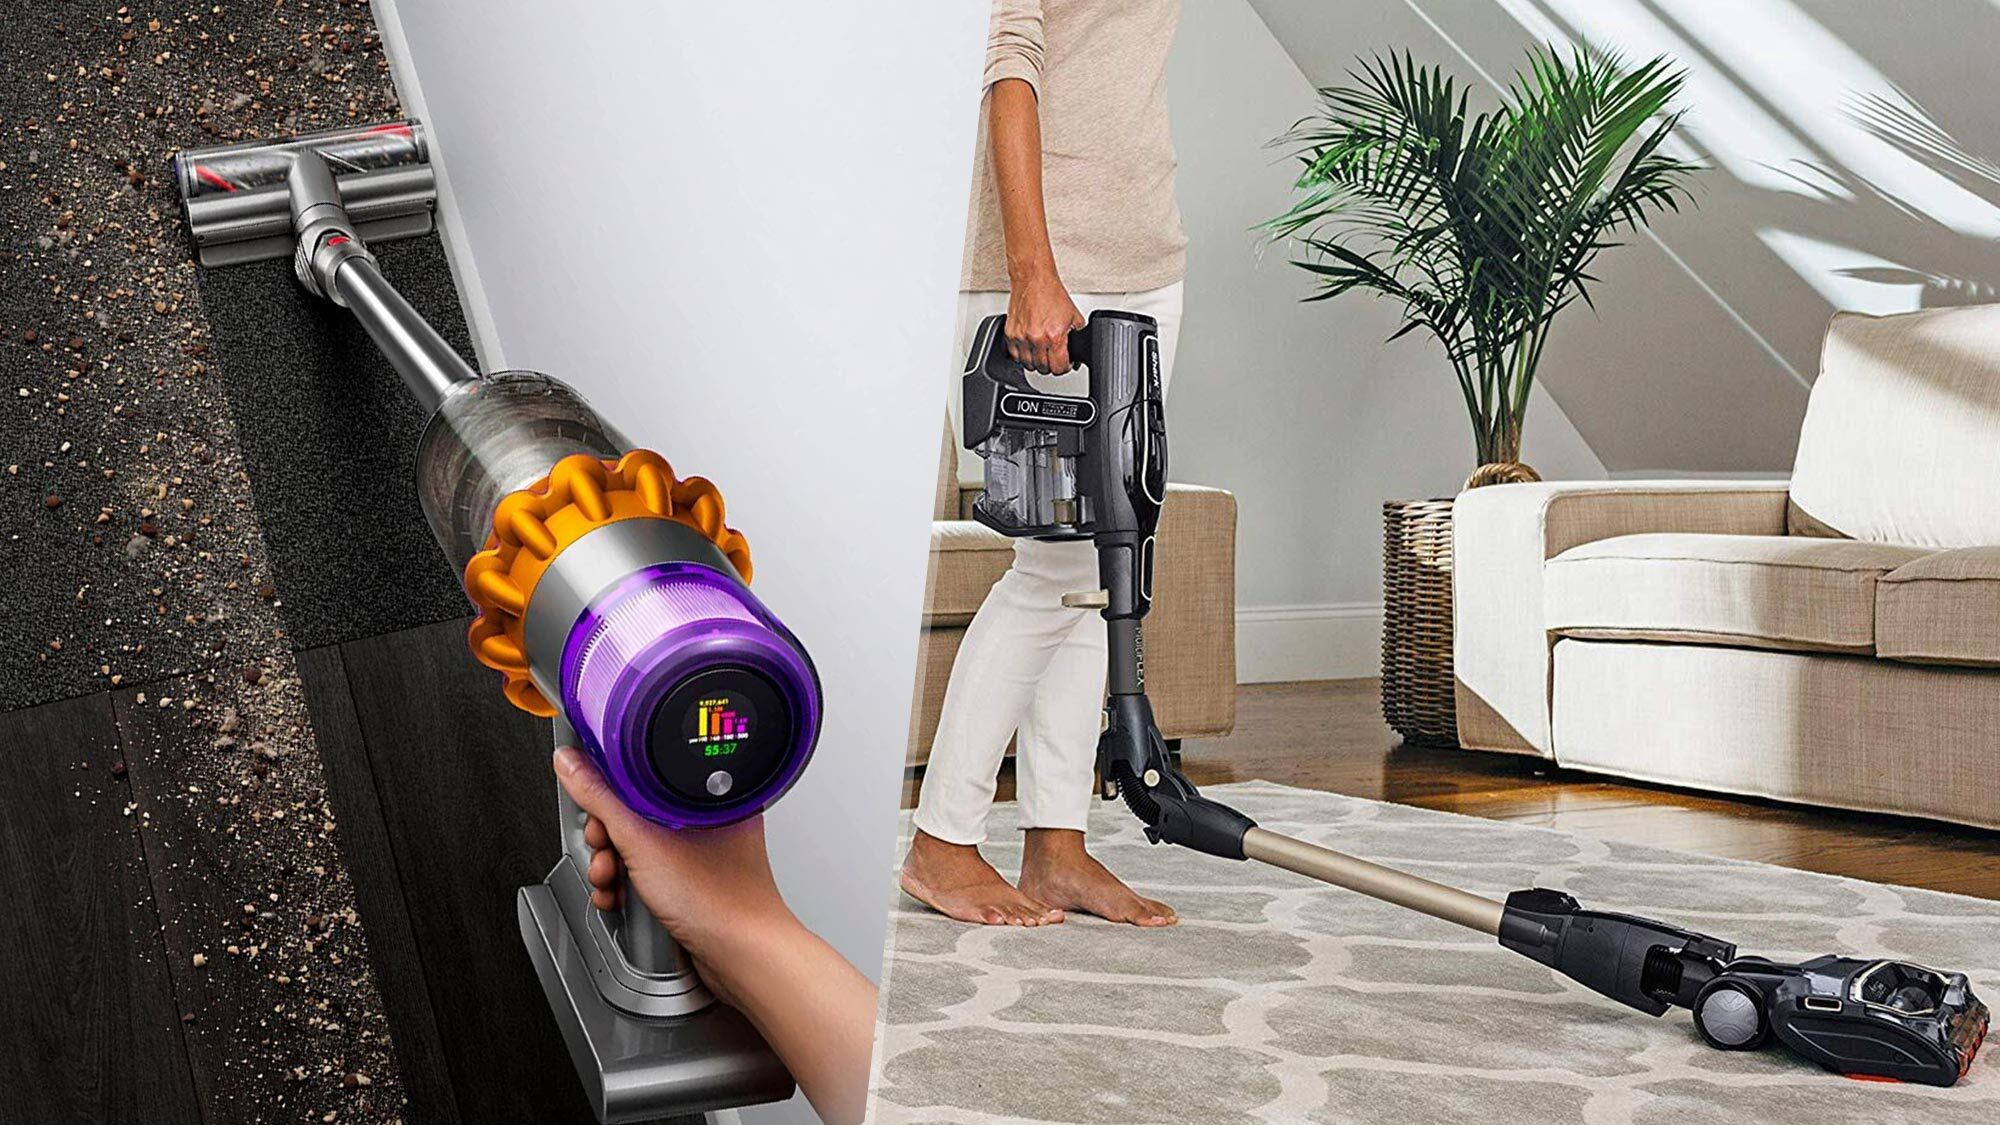 Dyson Ball Compact Allergy Plus Corded Bagless Pet Upright Vacuum